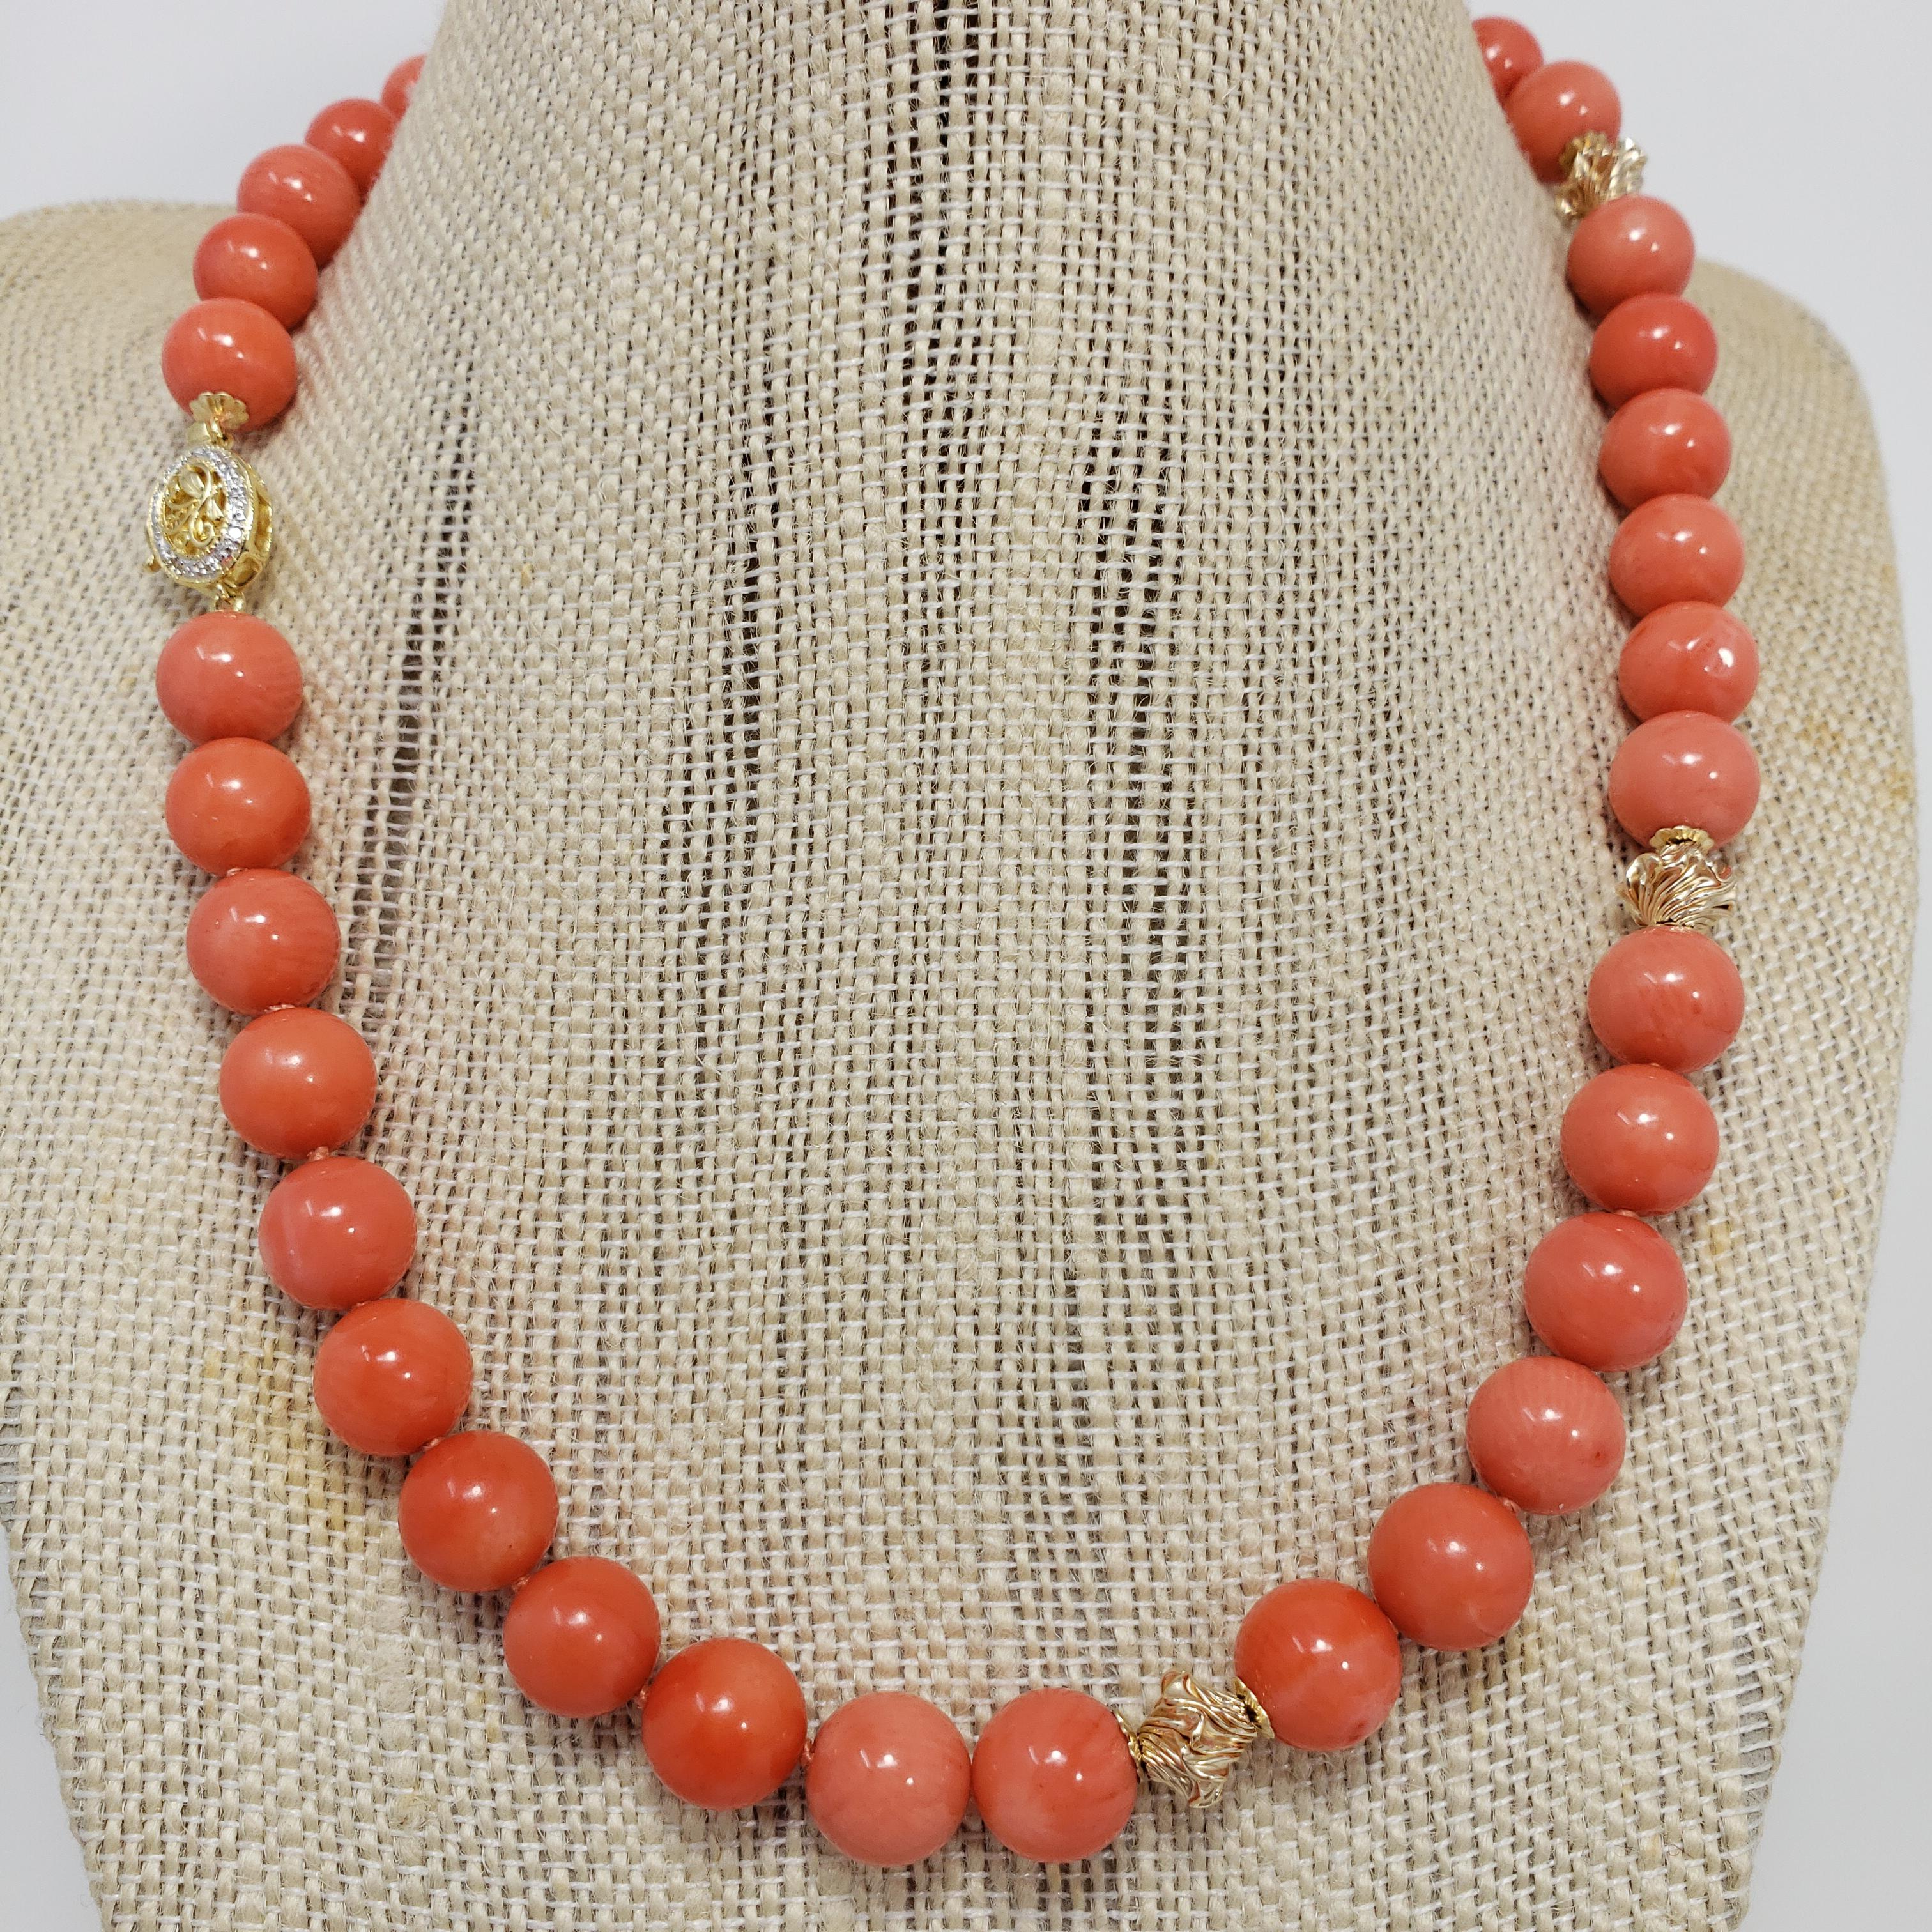 An elegant salmon coral bead necklace. This string necklace is decorated with 14K yellow gold motifs and fastened with a round gold and diamond clasp. The perfect balance of beauty and elegance, fit for royalty! 

Hallmarks: 585
Bead diameter approx